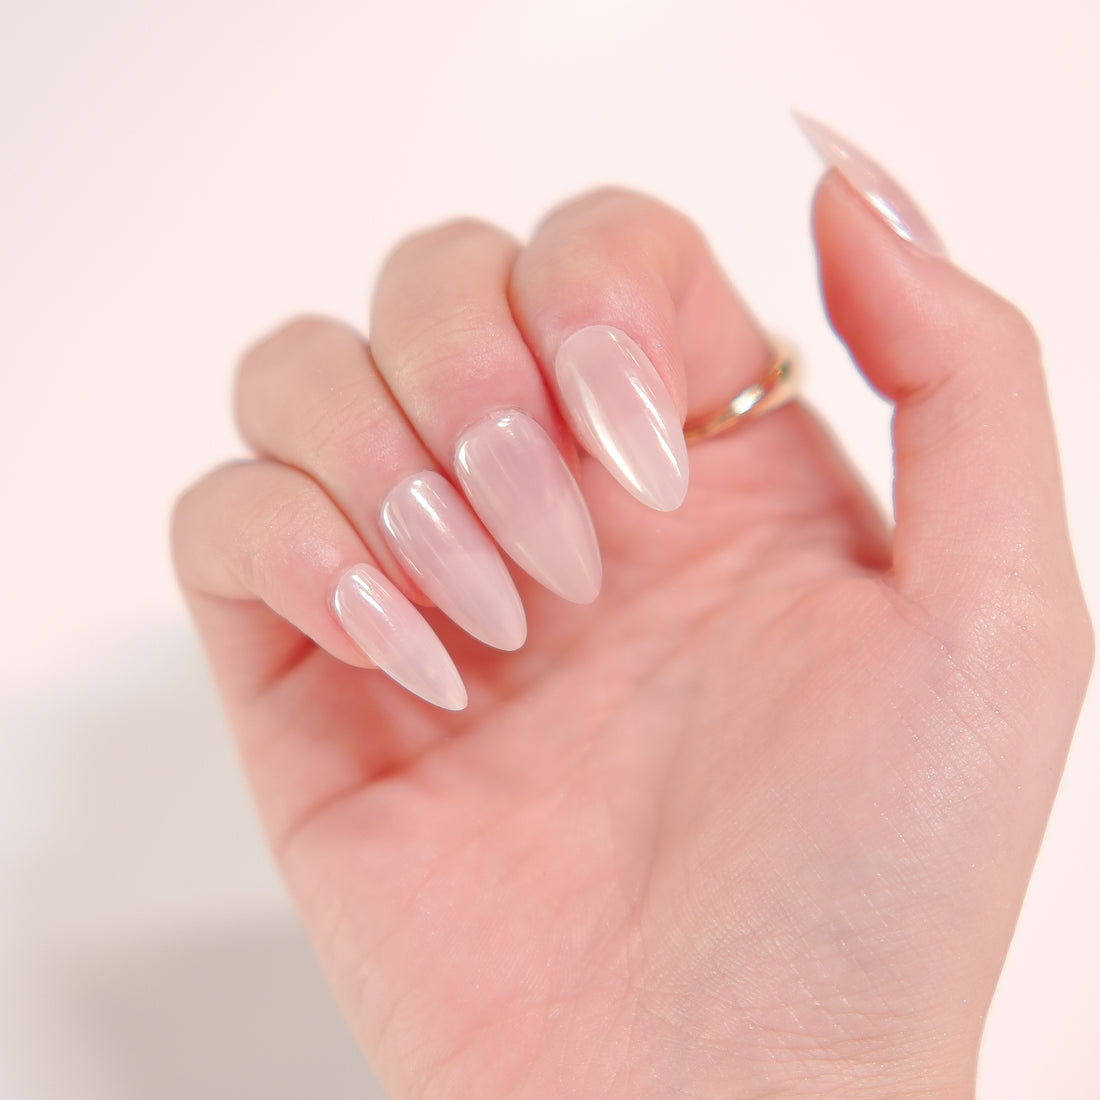 7 Easy Steps for Perfect At-Home Manicure